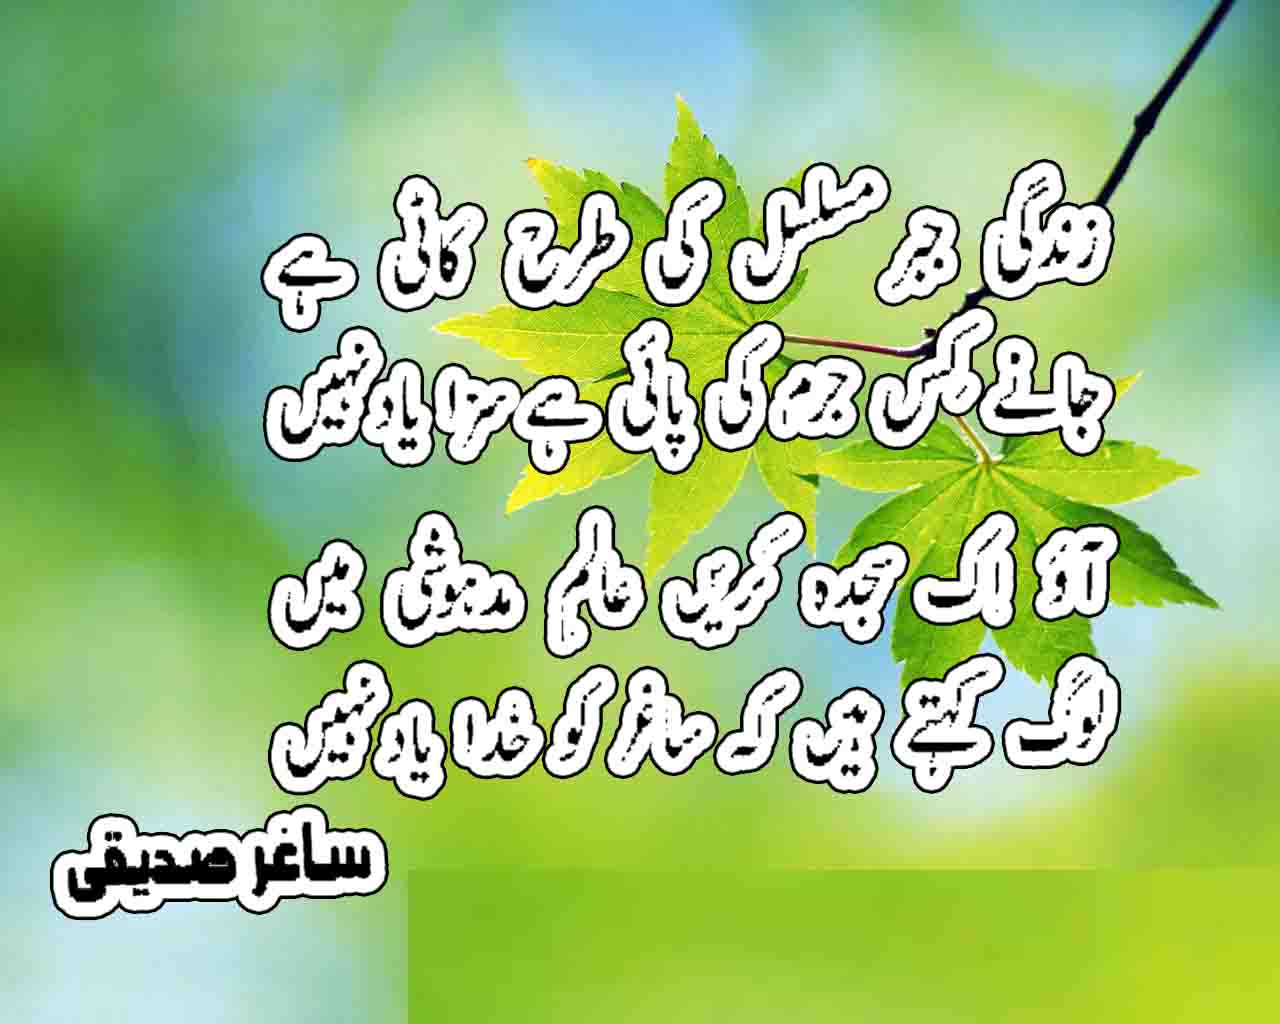 Urdu Love Poetry Shayari Quotes Poetry in English Shayri SMS Story Poetry for Her poems Poetry Image